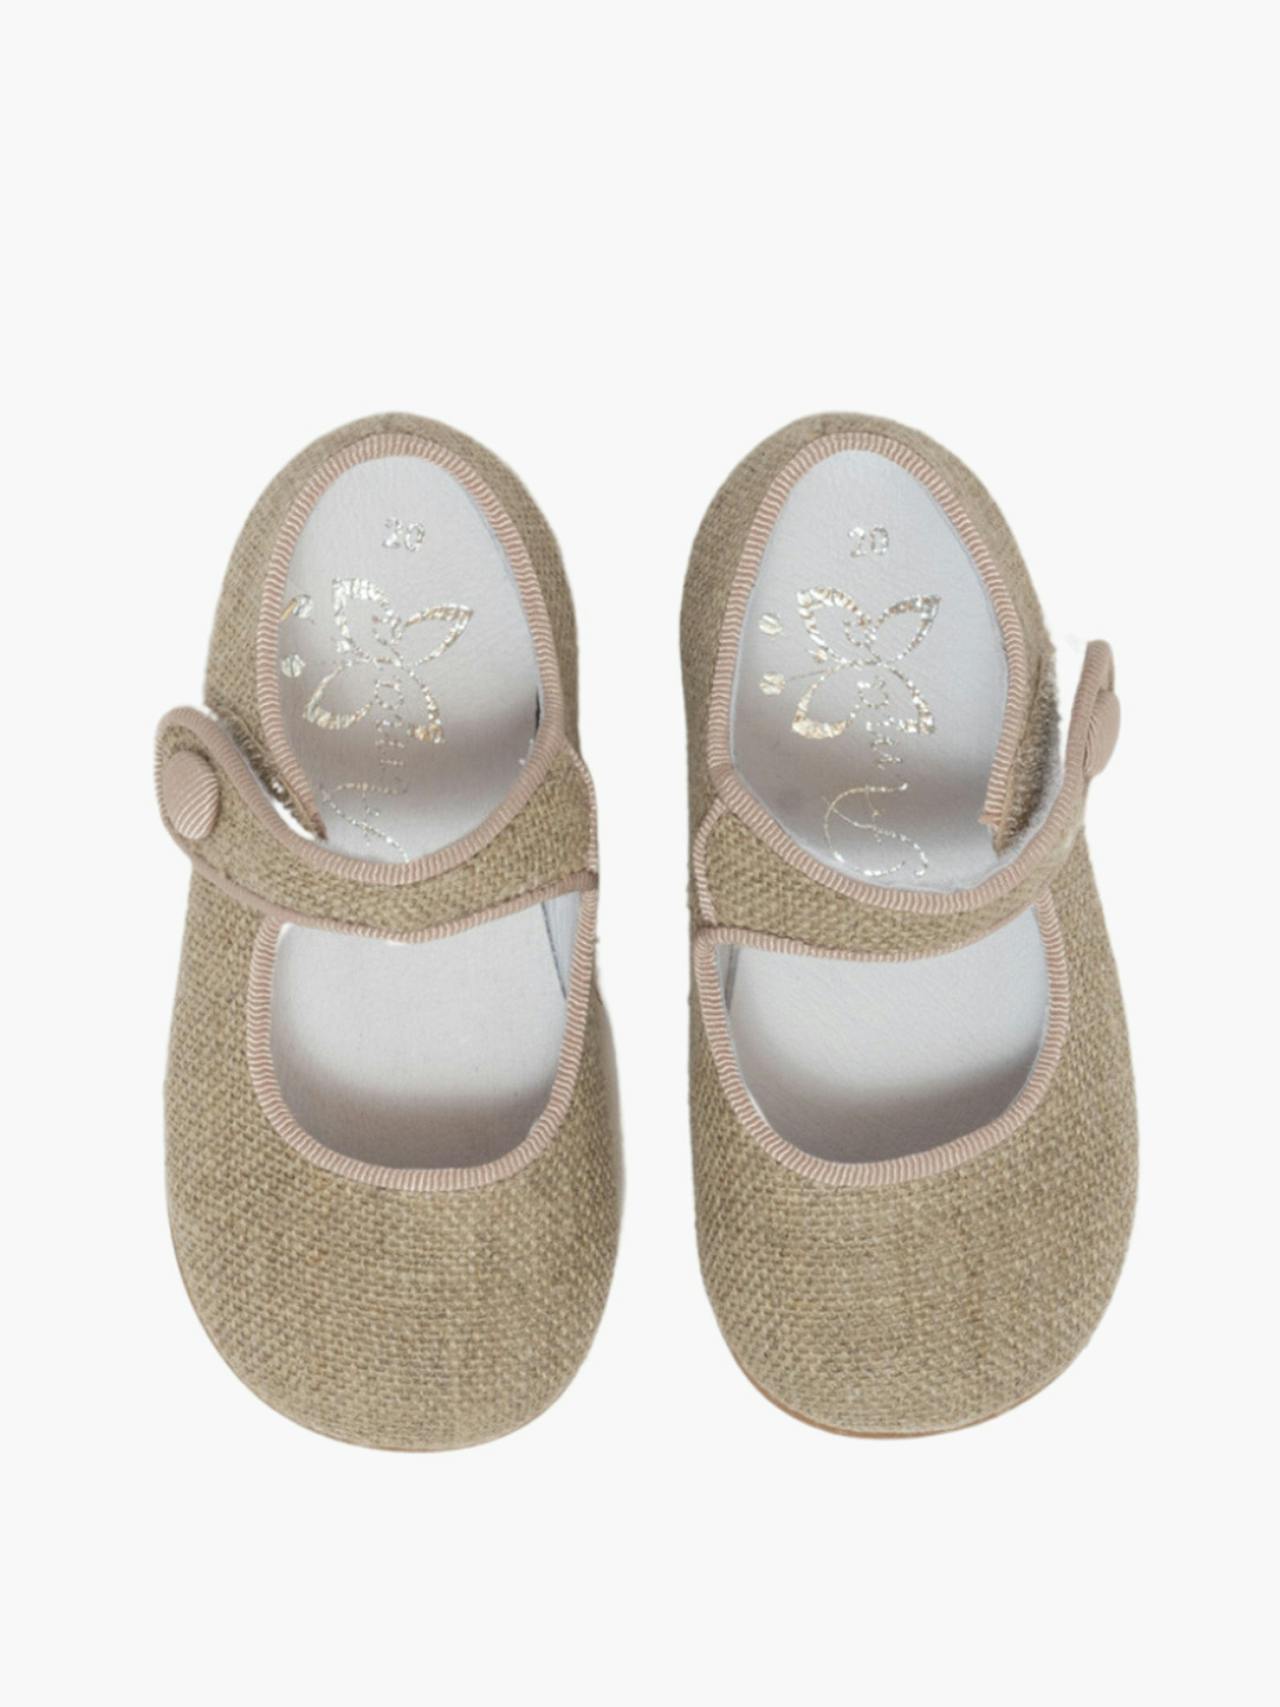 Baby girl shoes linen